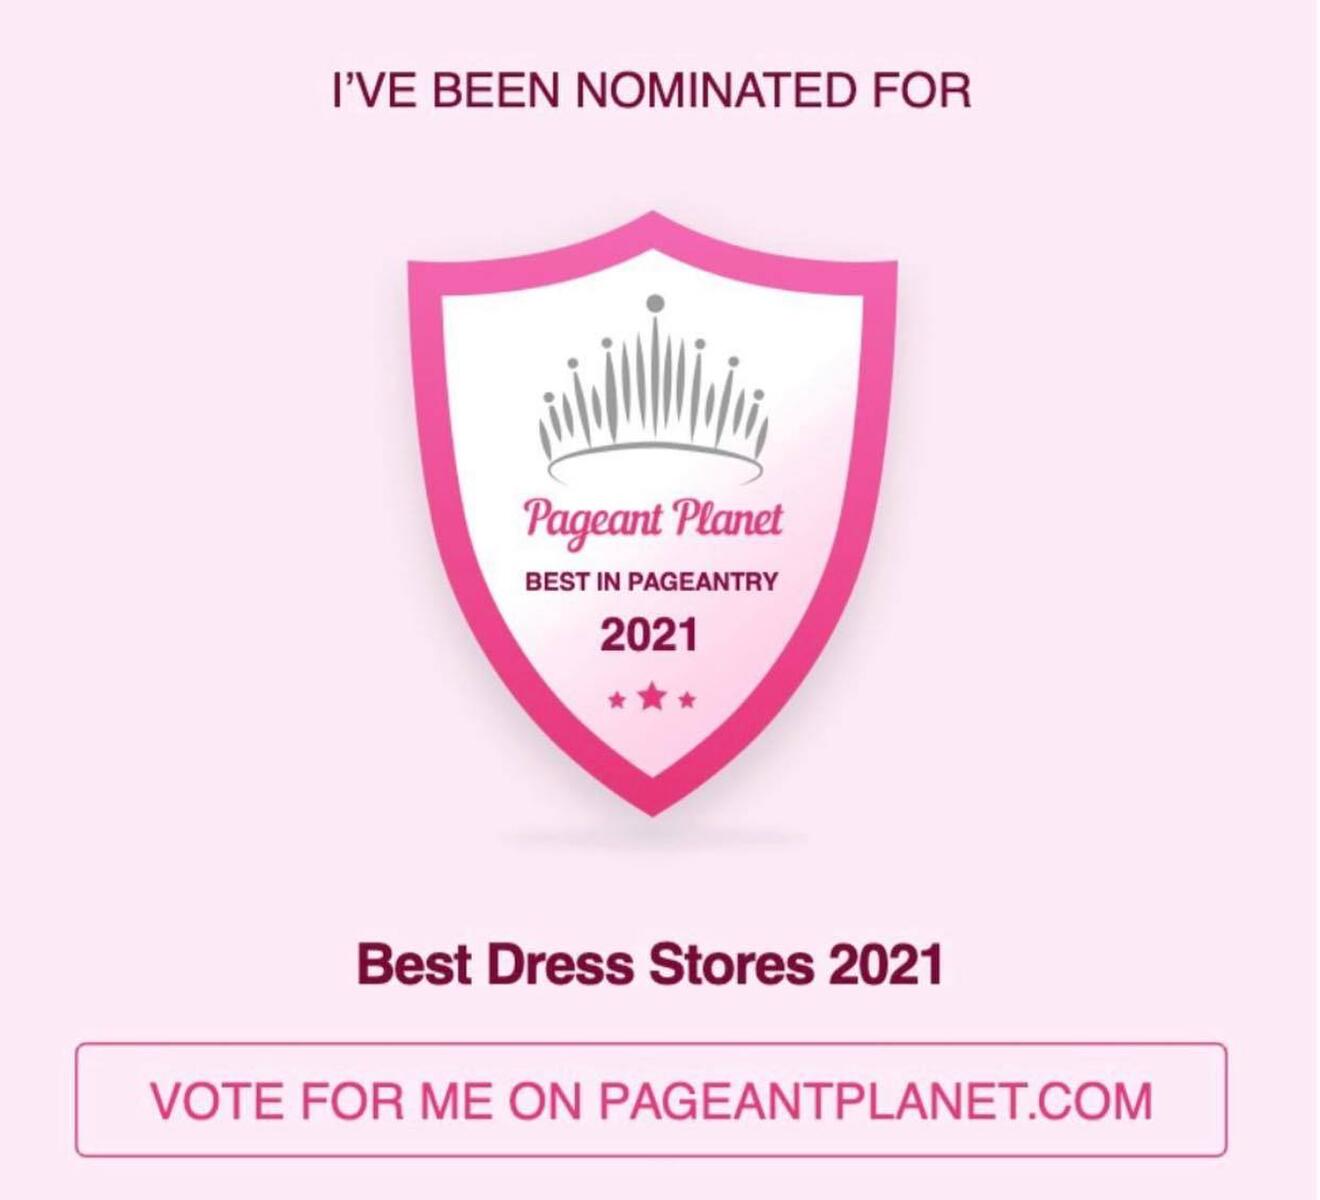 We've Been Nominated For Best In Pageantry! Please Leave a Review Today on PageantPlanet.com